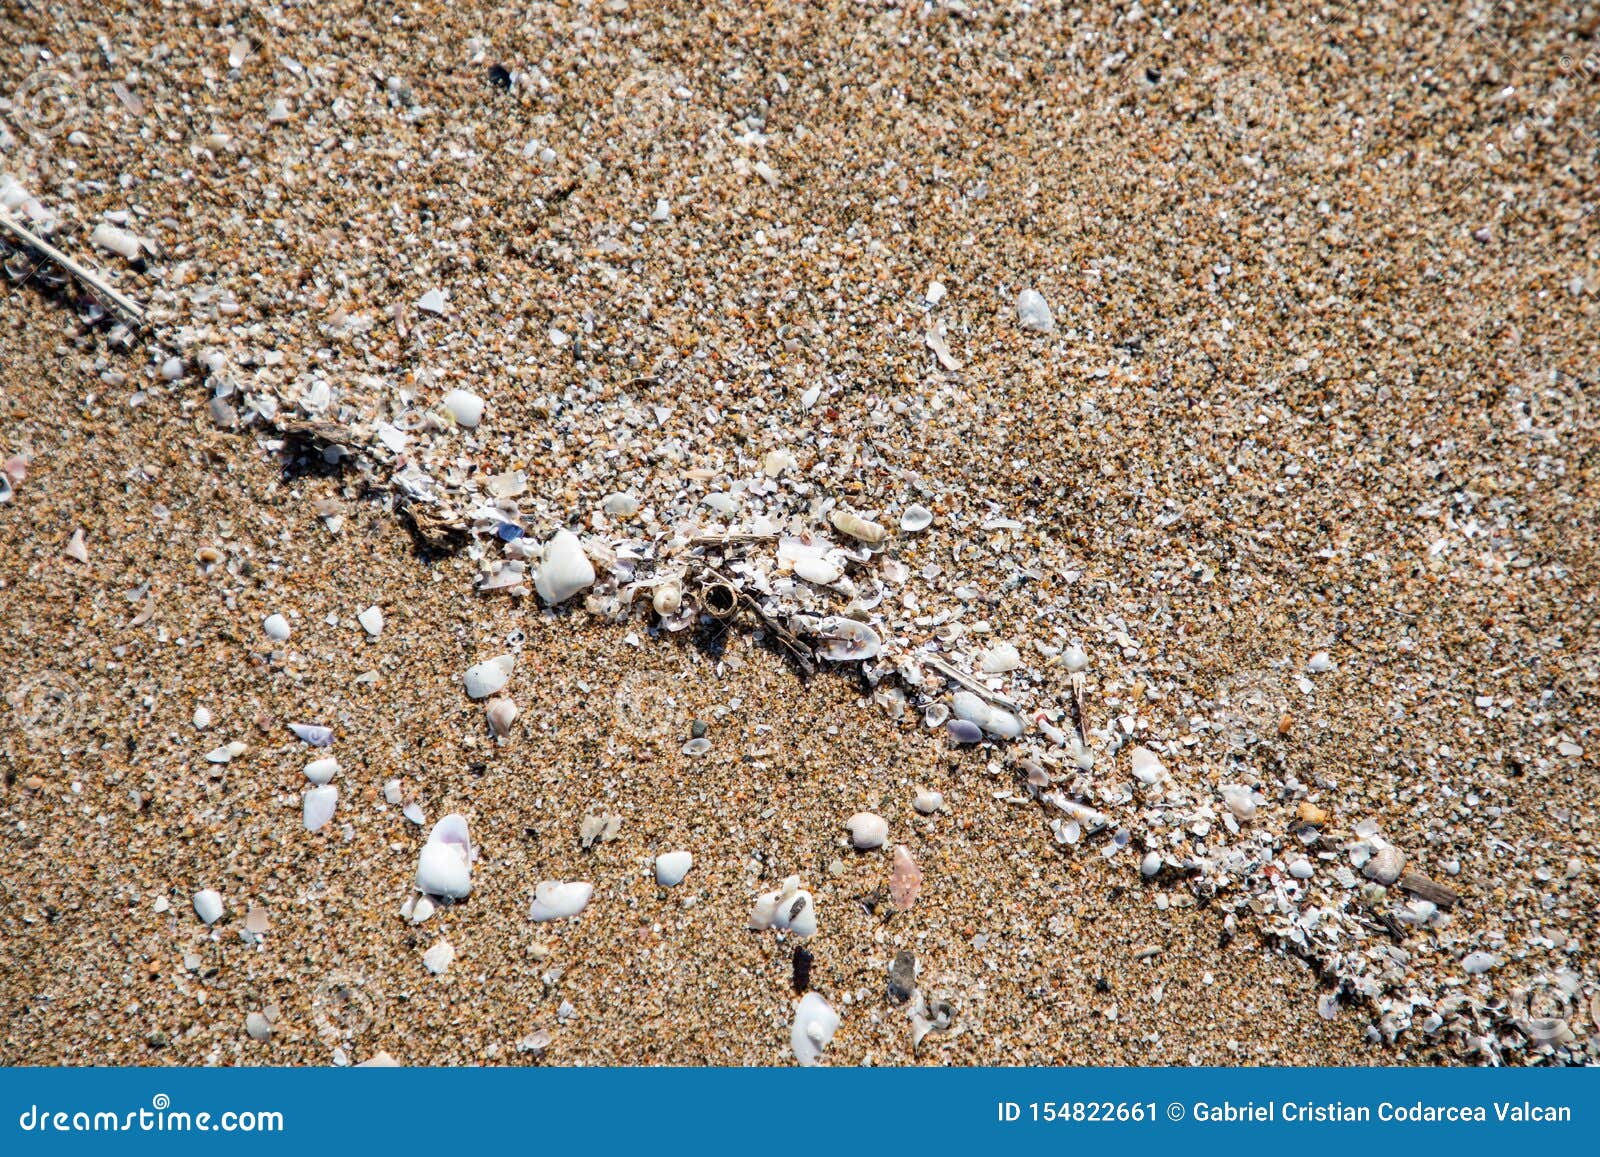 close up view of shells in the sand